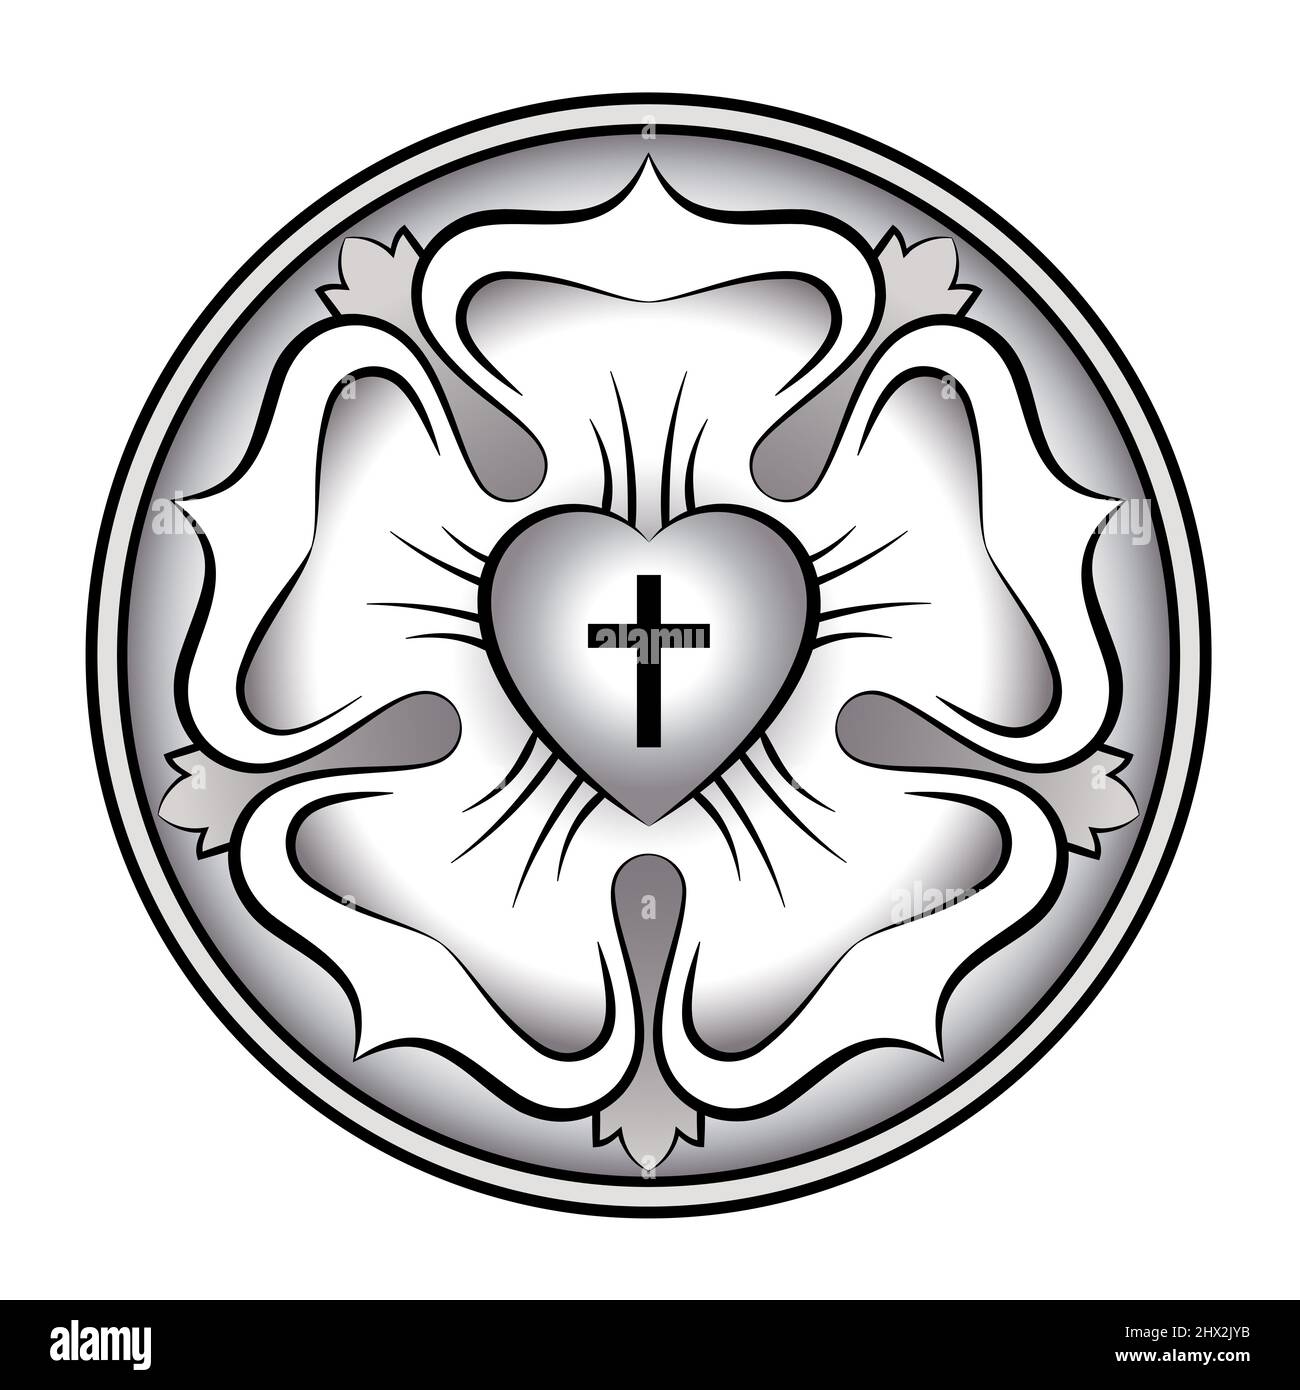 Luther rose luther seal symbol Fotos e Imágenes de stock - Alamy